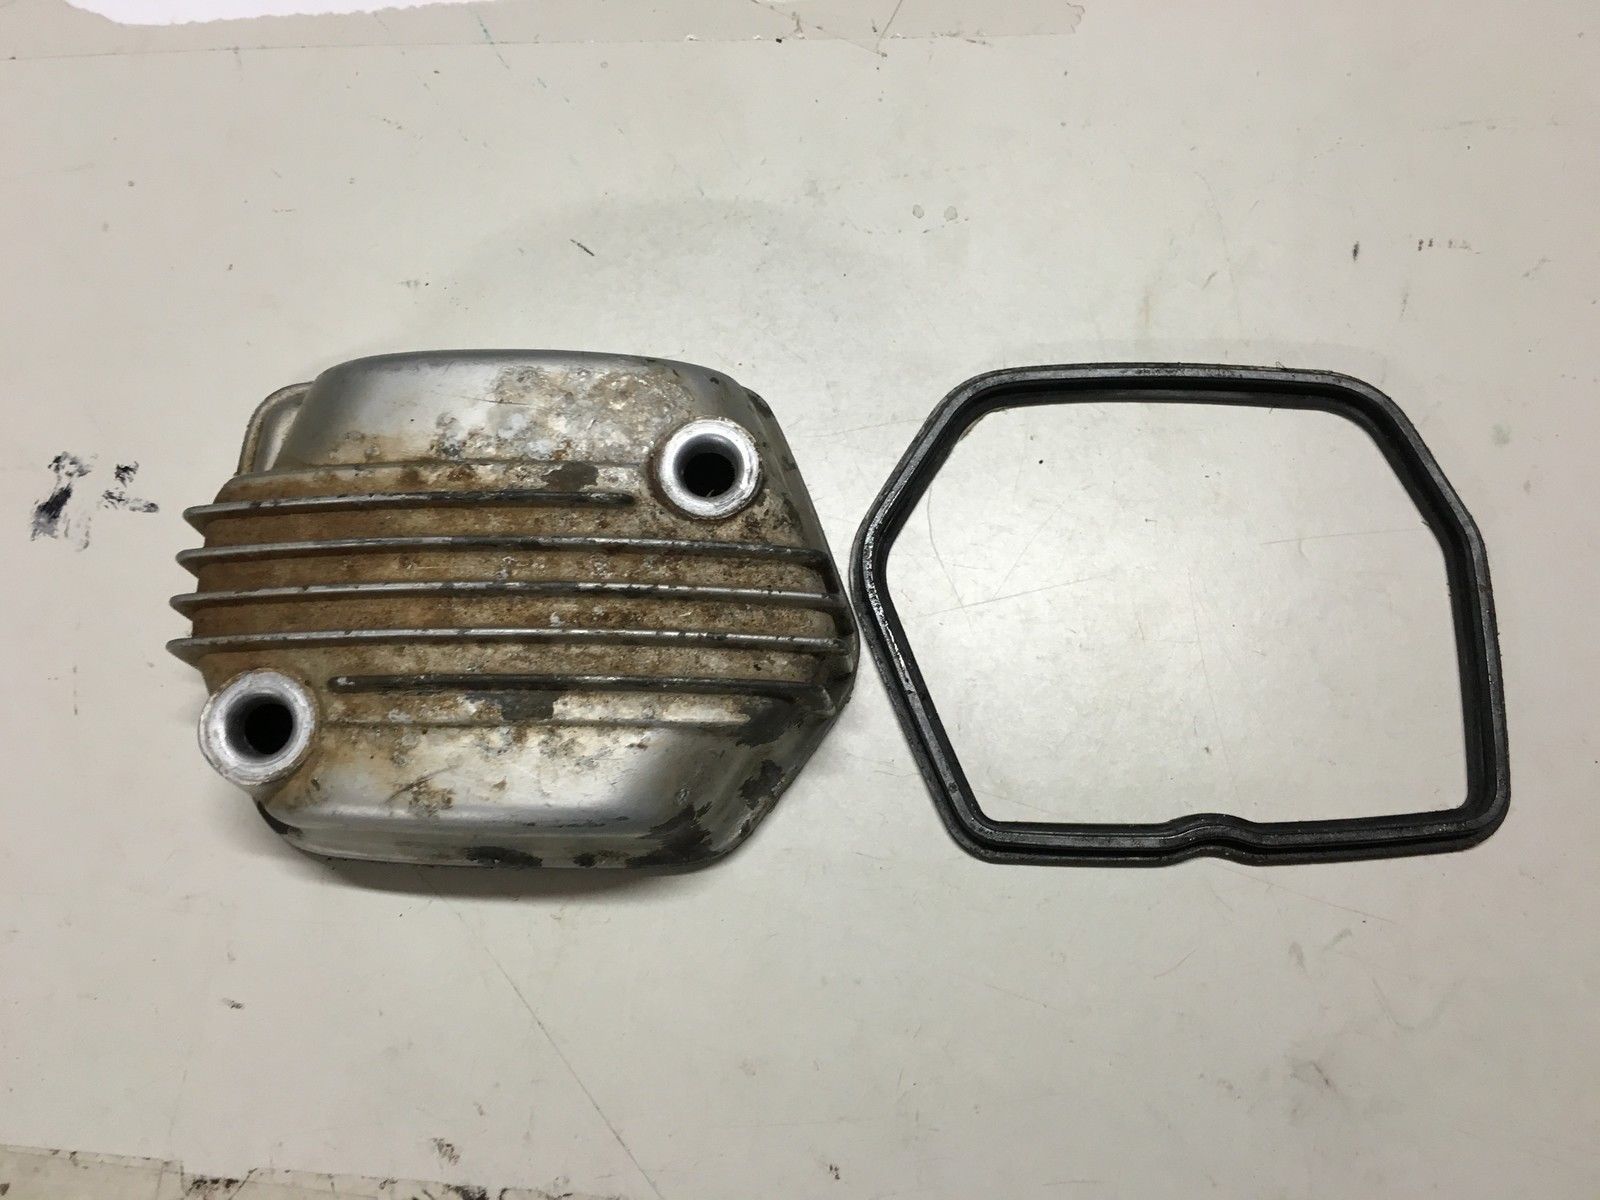  HONDA  XR 80  100 R CRF  TOP ENGINE  TAPPET COVER